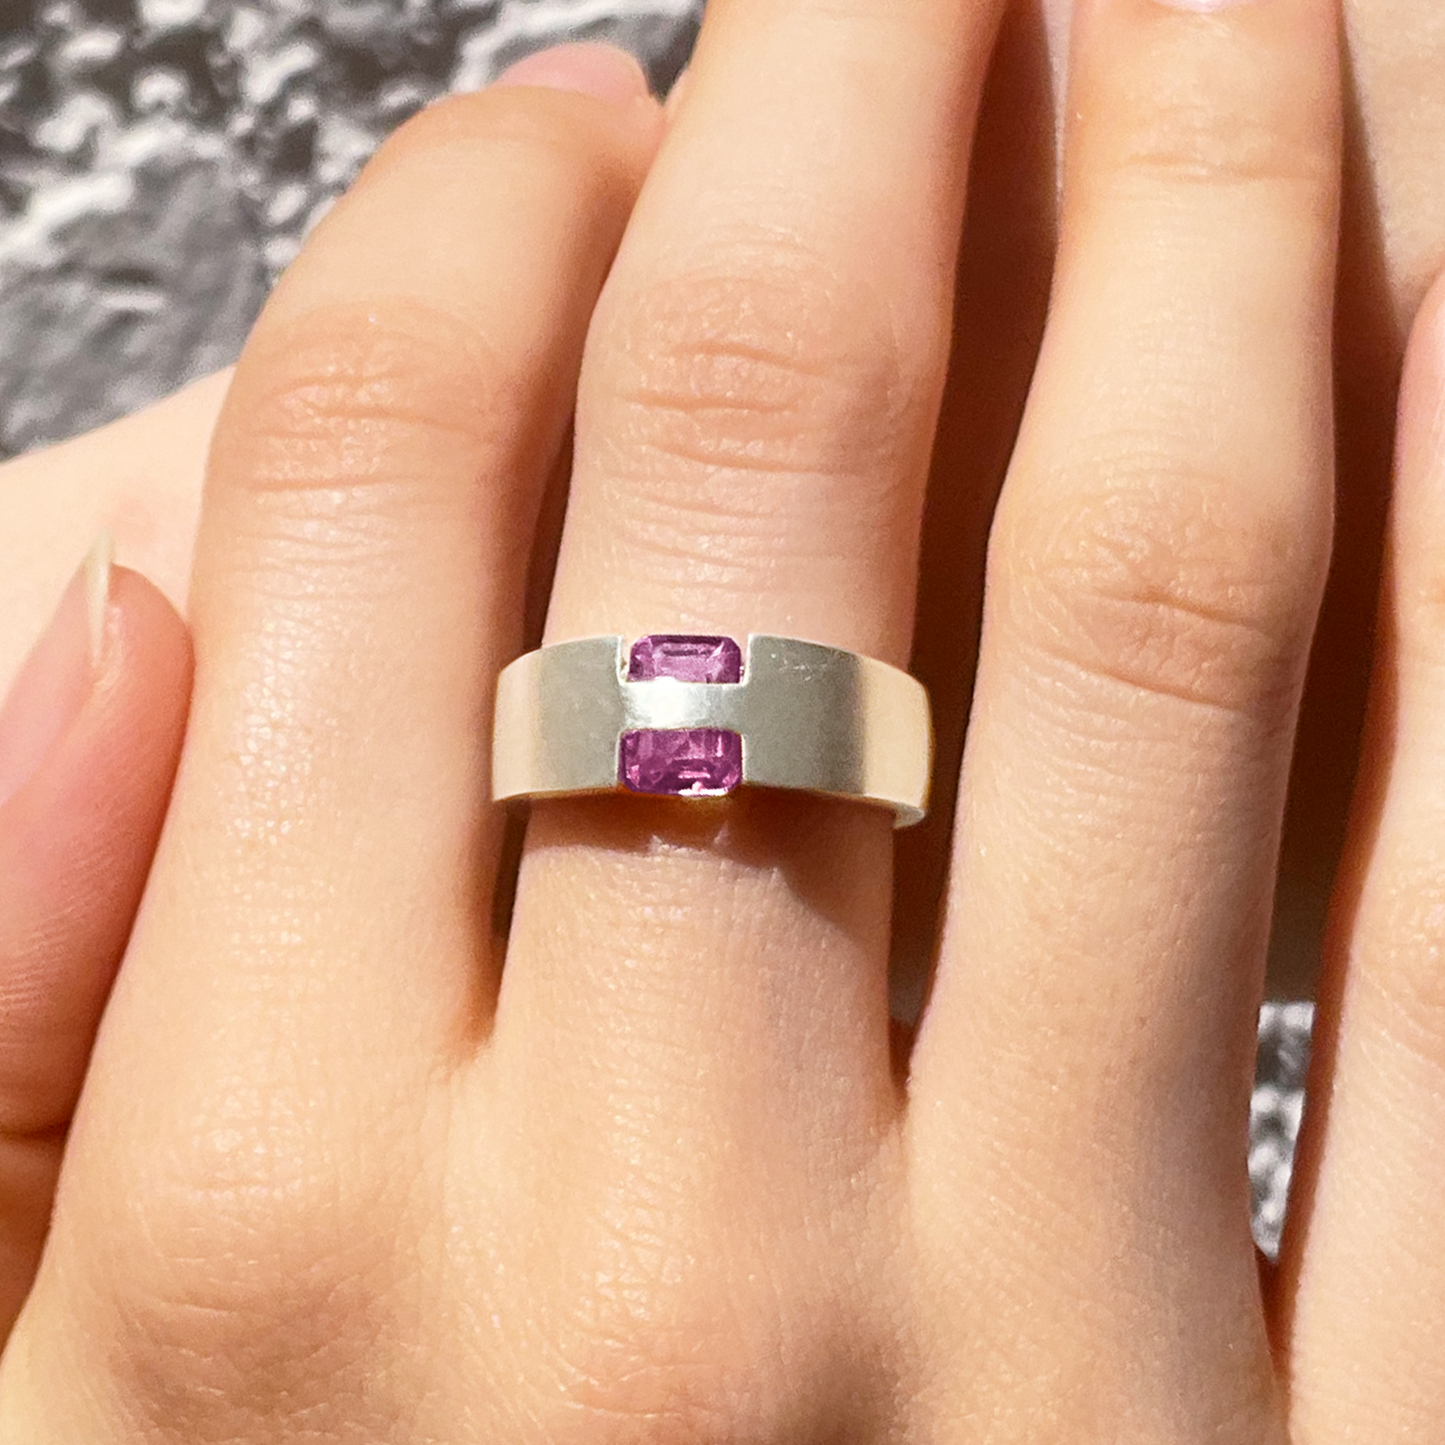 [Amethyst] hide and sparkle silver #exploring